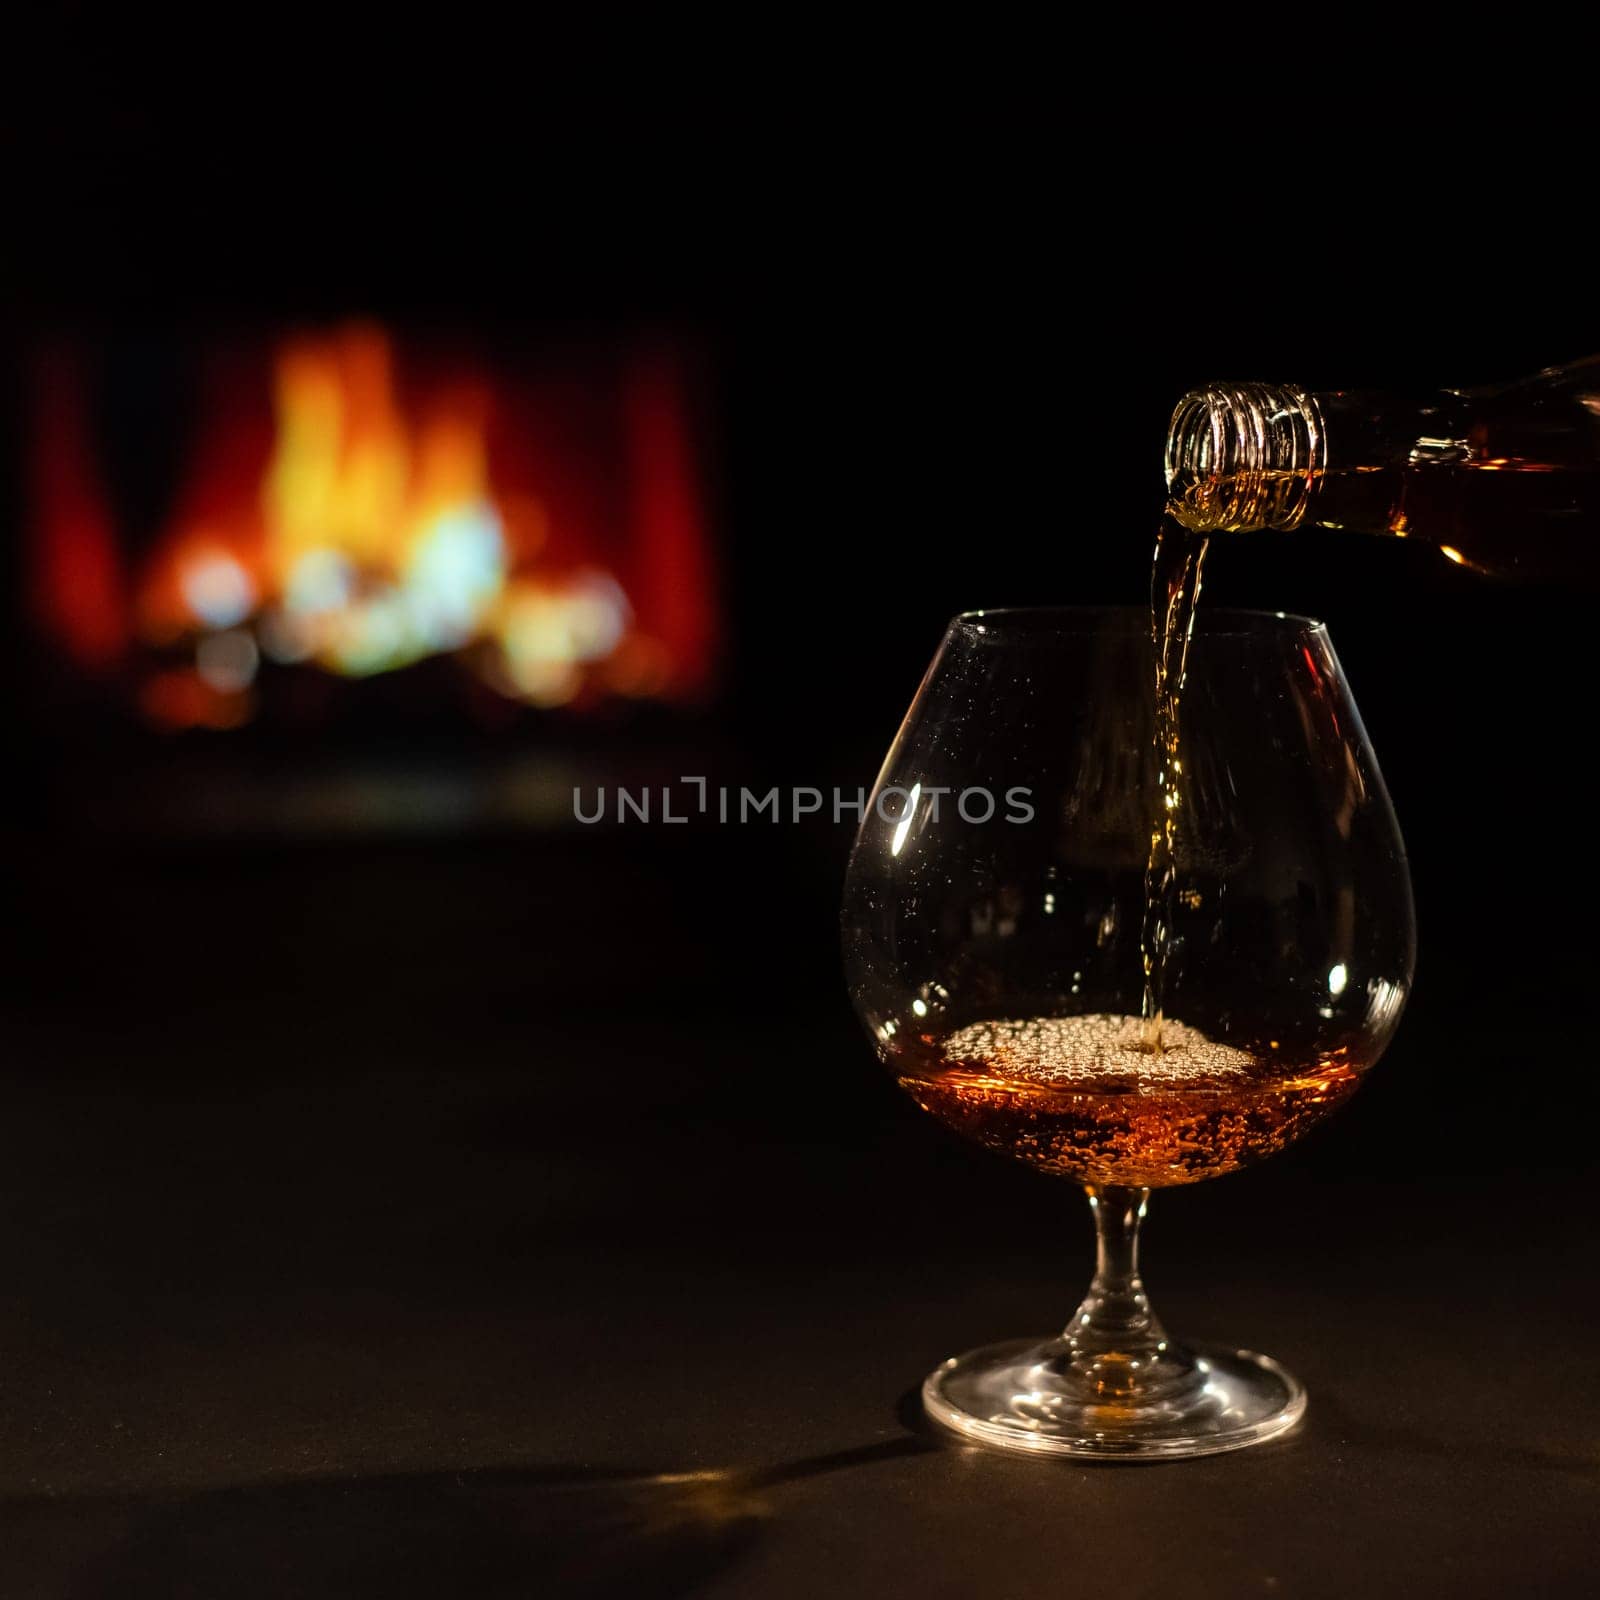 Pour brandy into a glass against the background of the fireplace by mrwed54